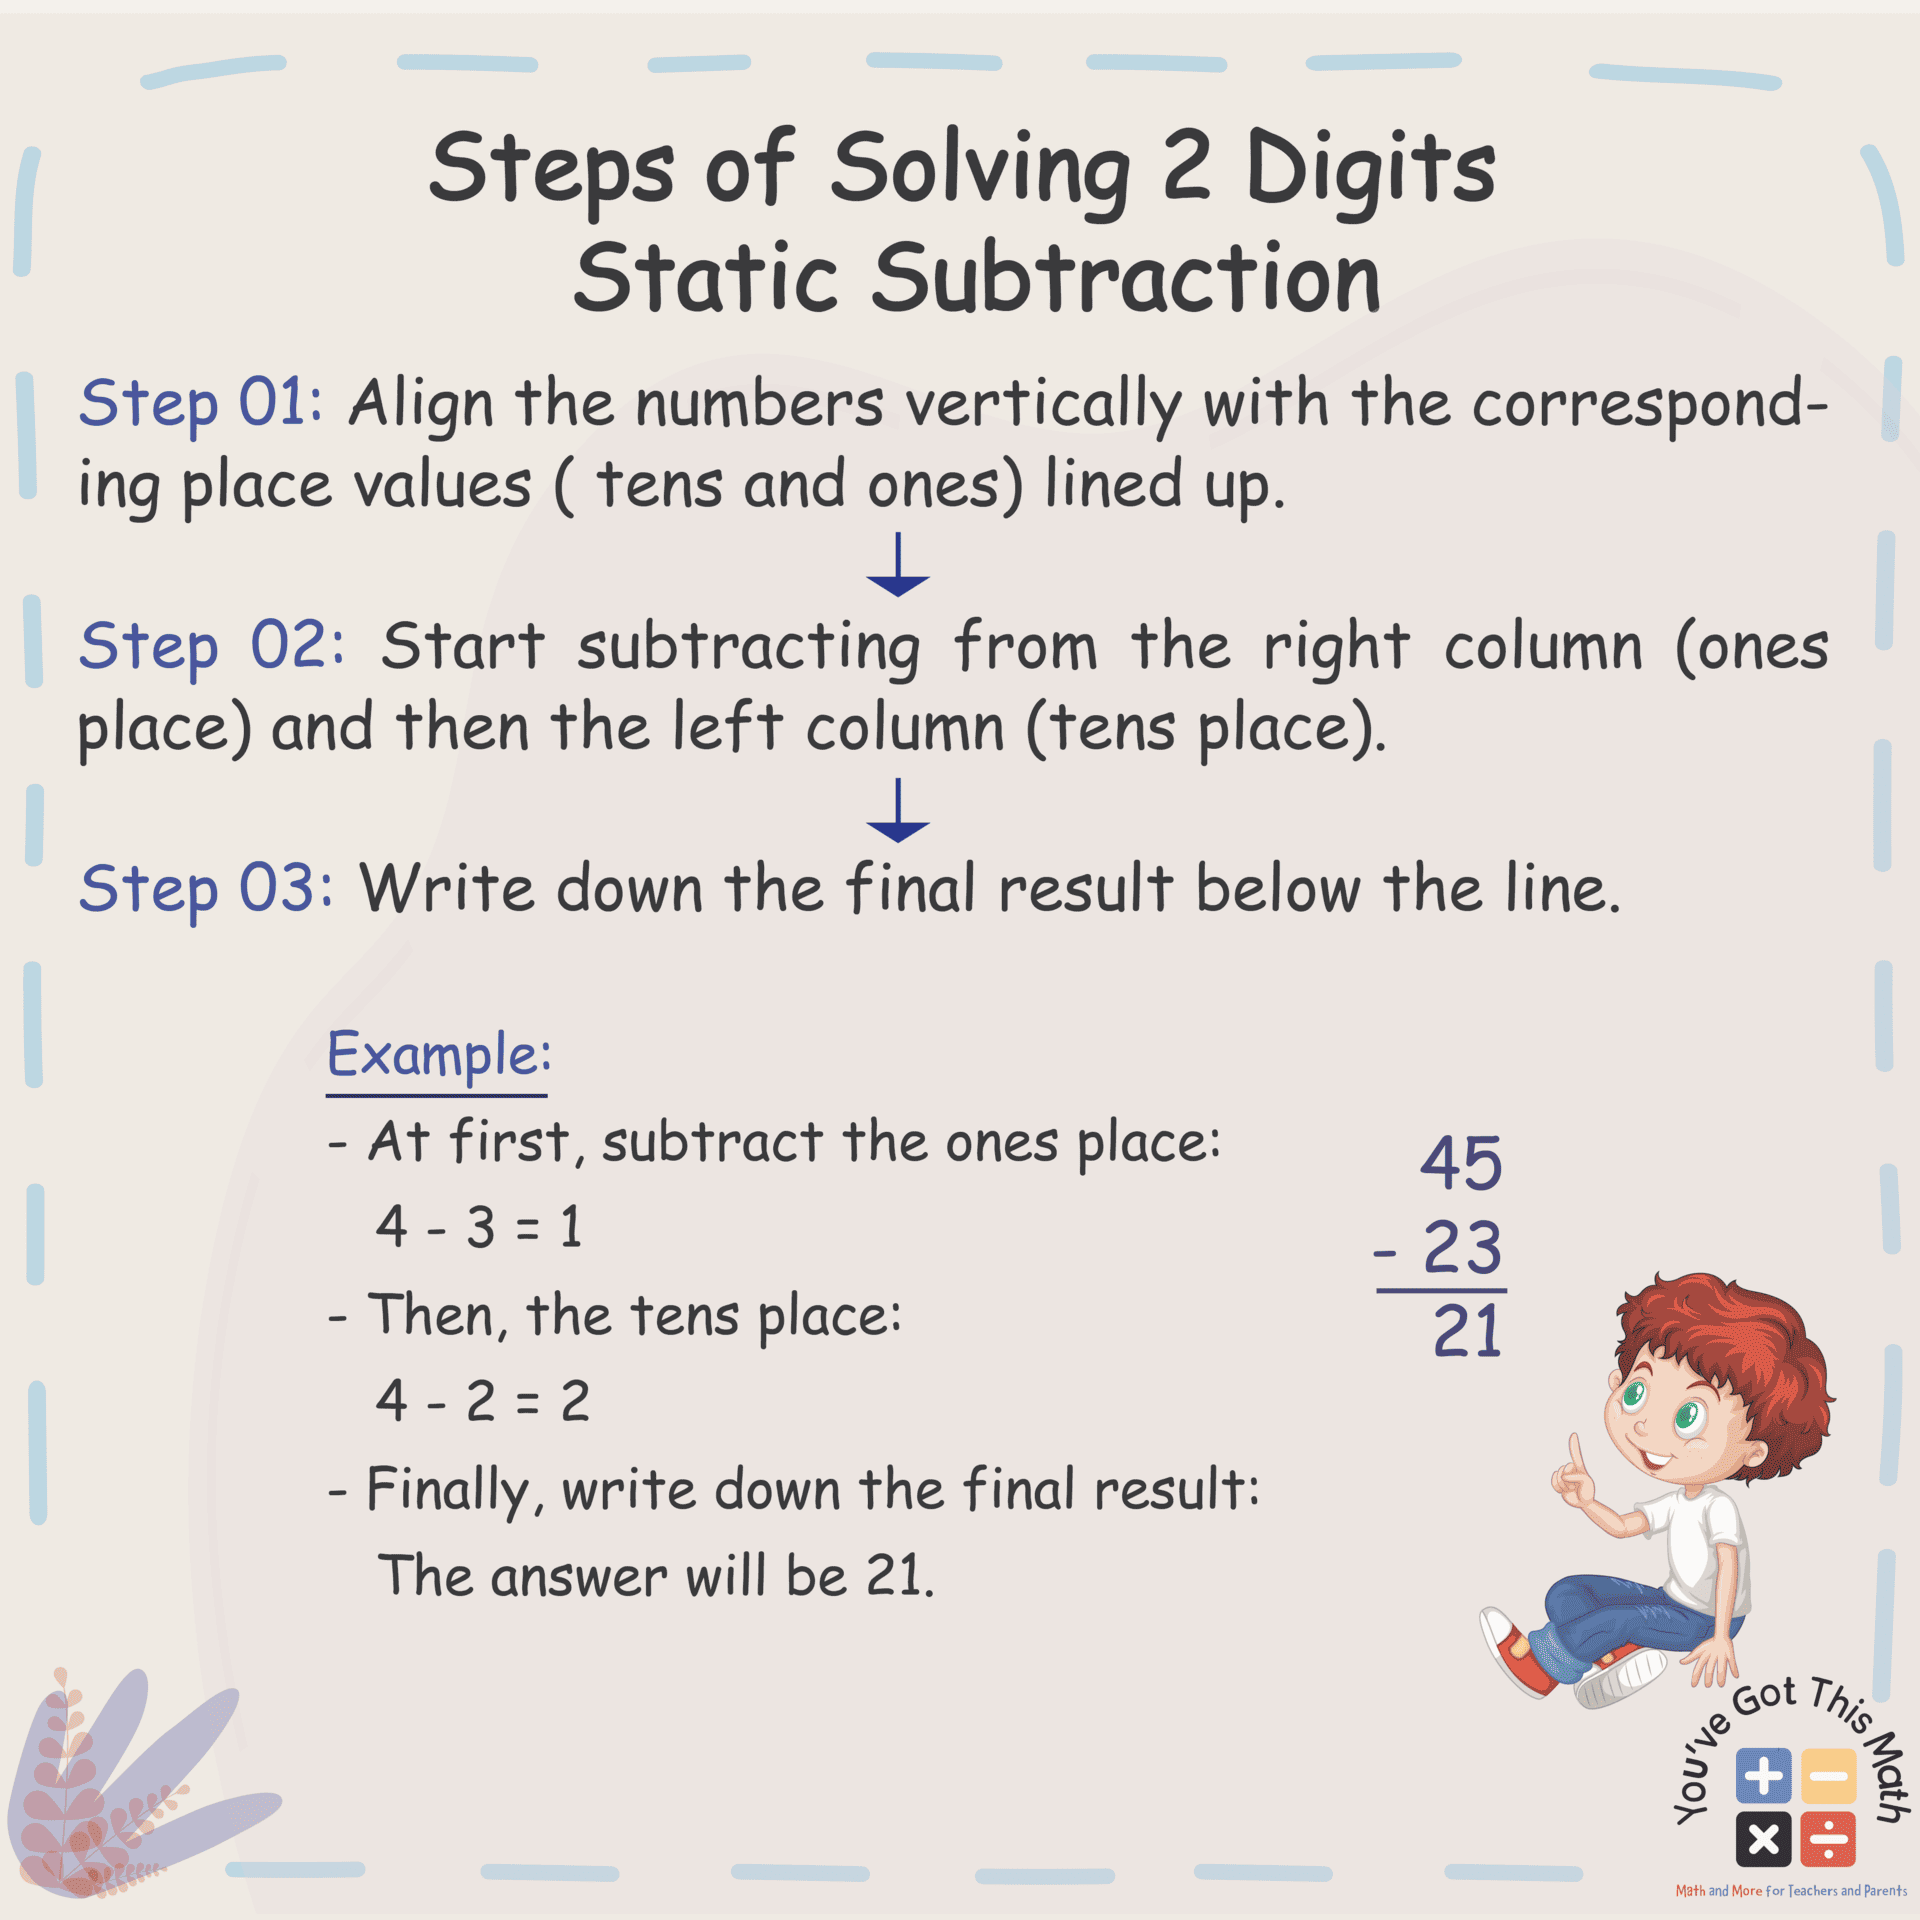 Steps of Solving 2 Digits Static Subtraction-01